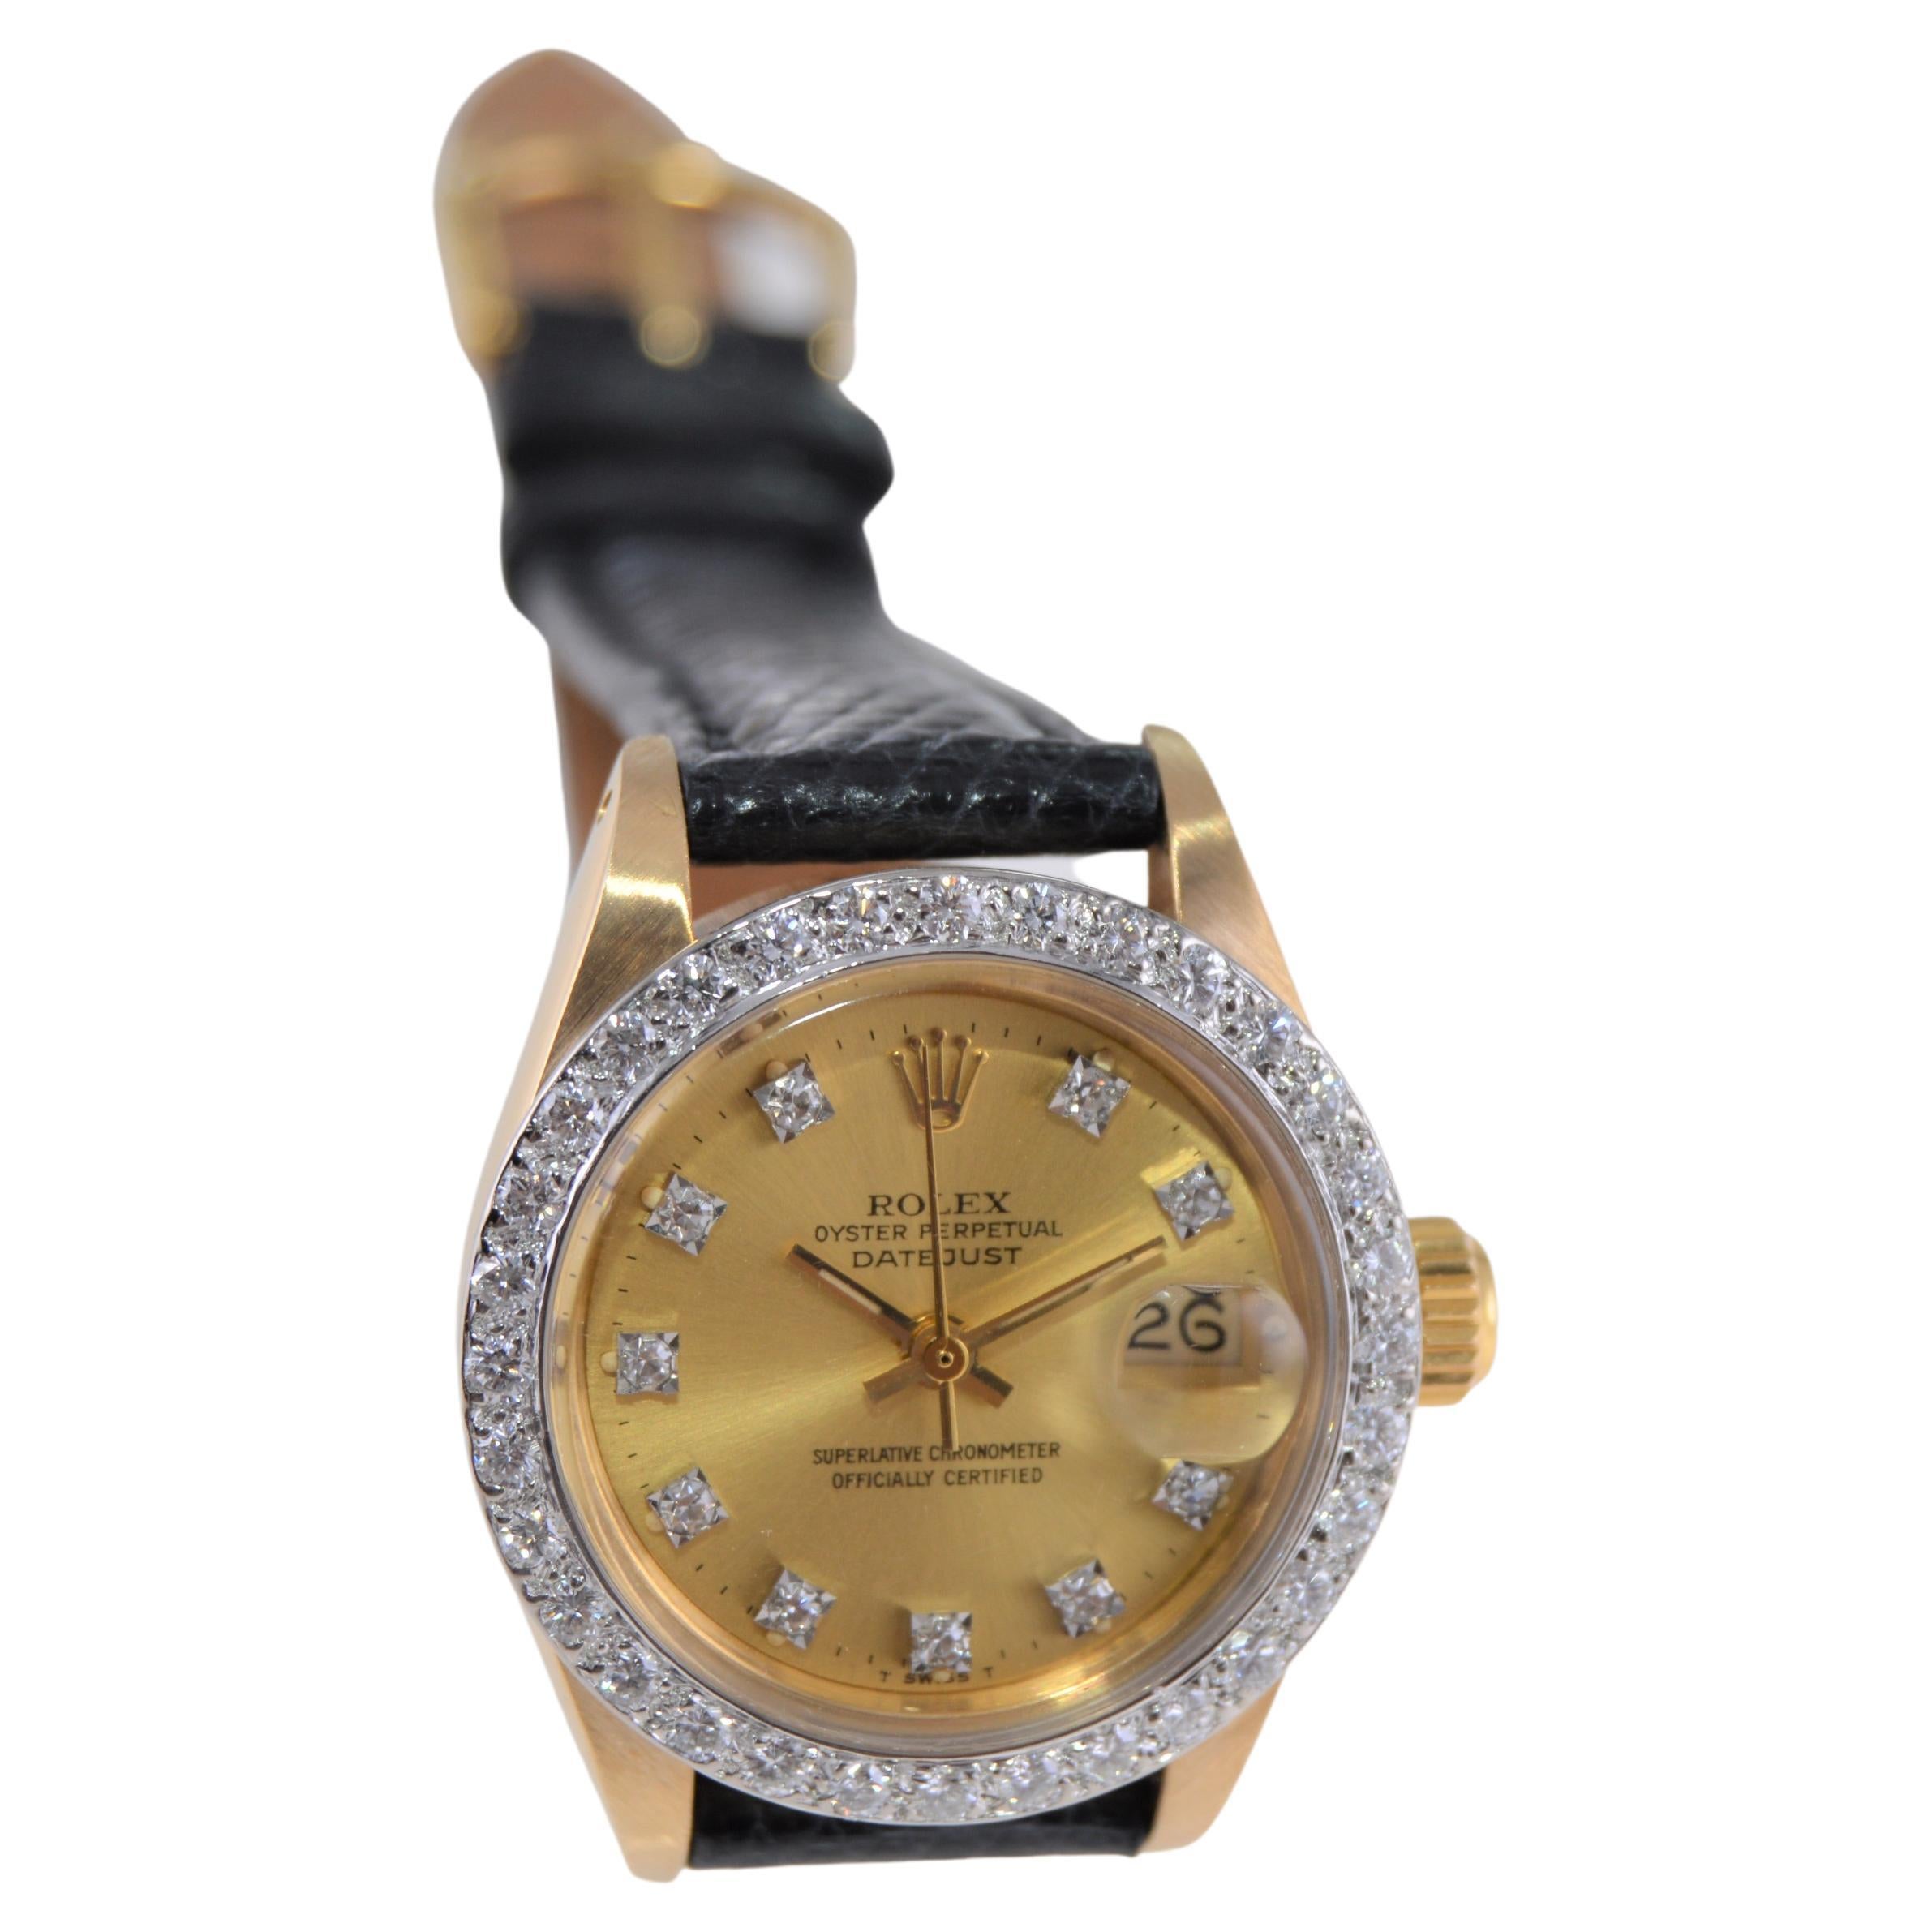 Rolex Ladies Datejust 18 Karat Yellow Gold with Diamond Bezel, 1970s In Excellent Condition For Sale In Long Beach, CA